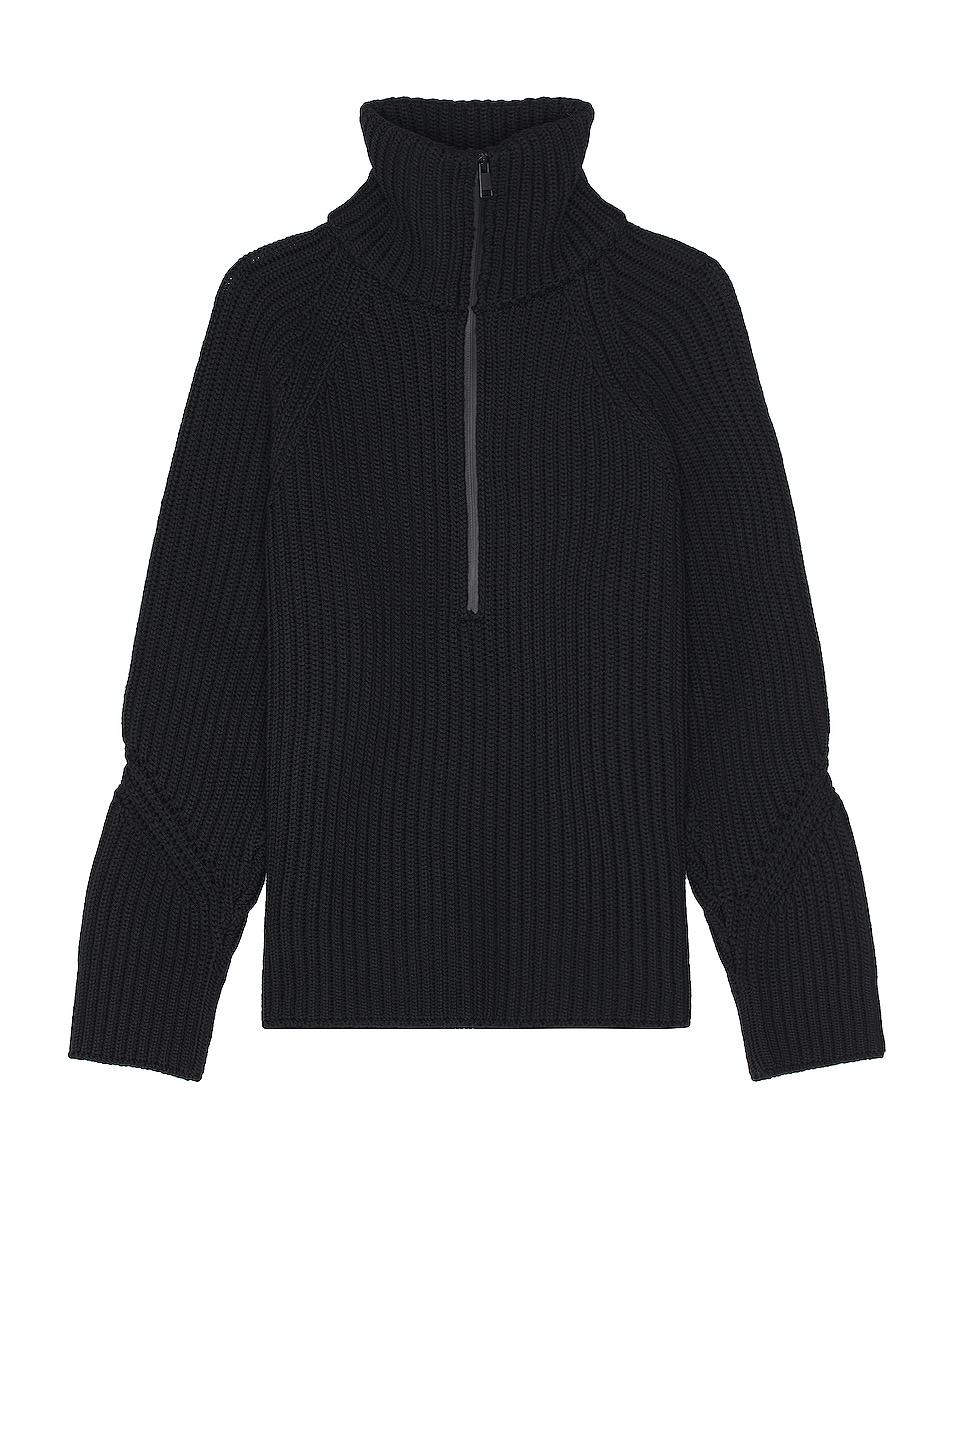 Image 1 of Zegna Wool and Nylon Zip Mock Sweater in Black